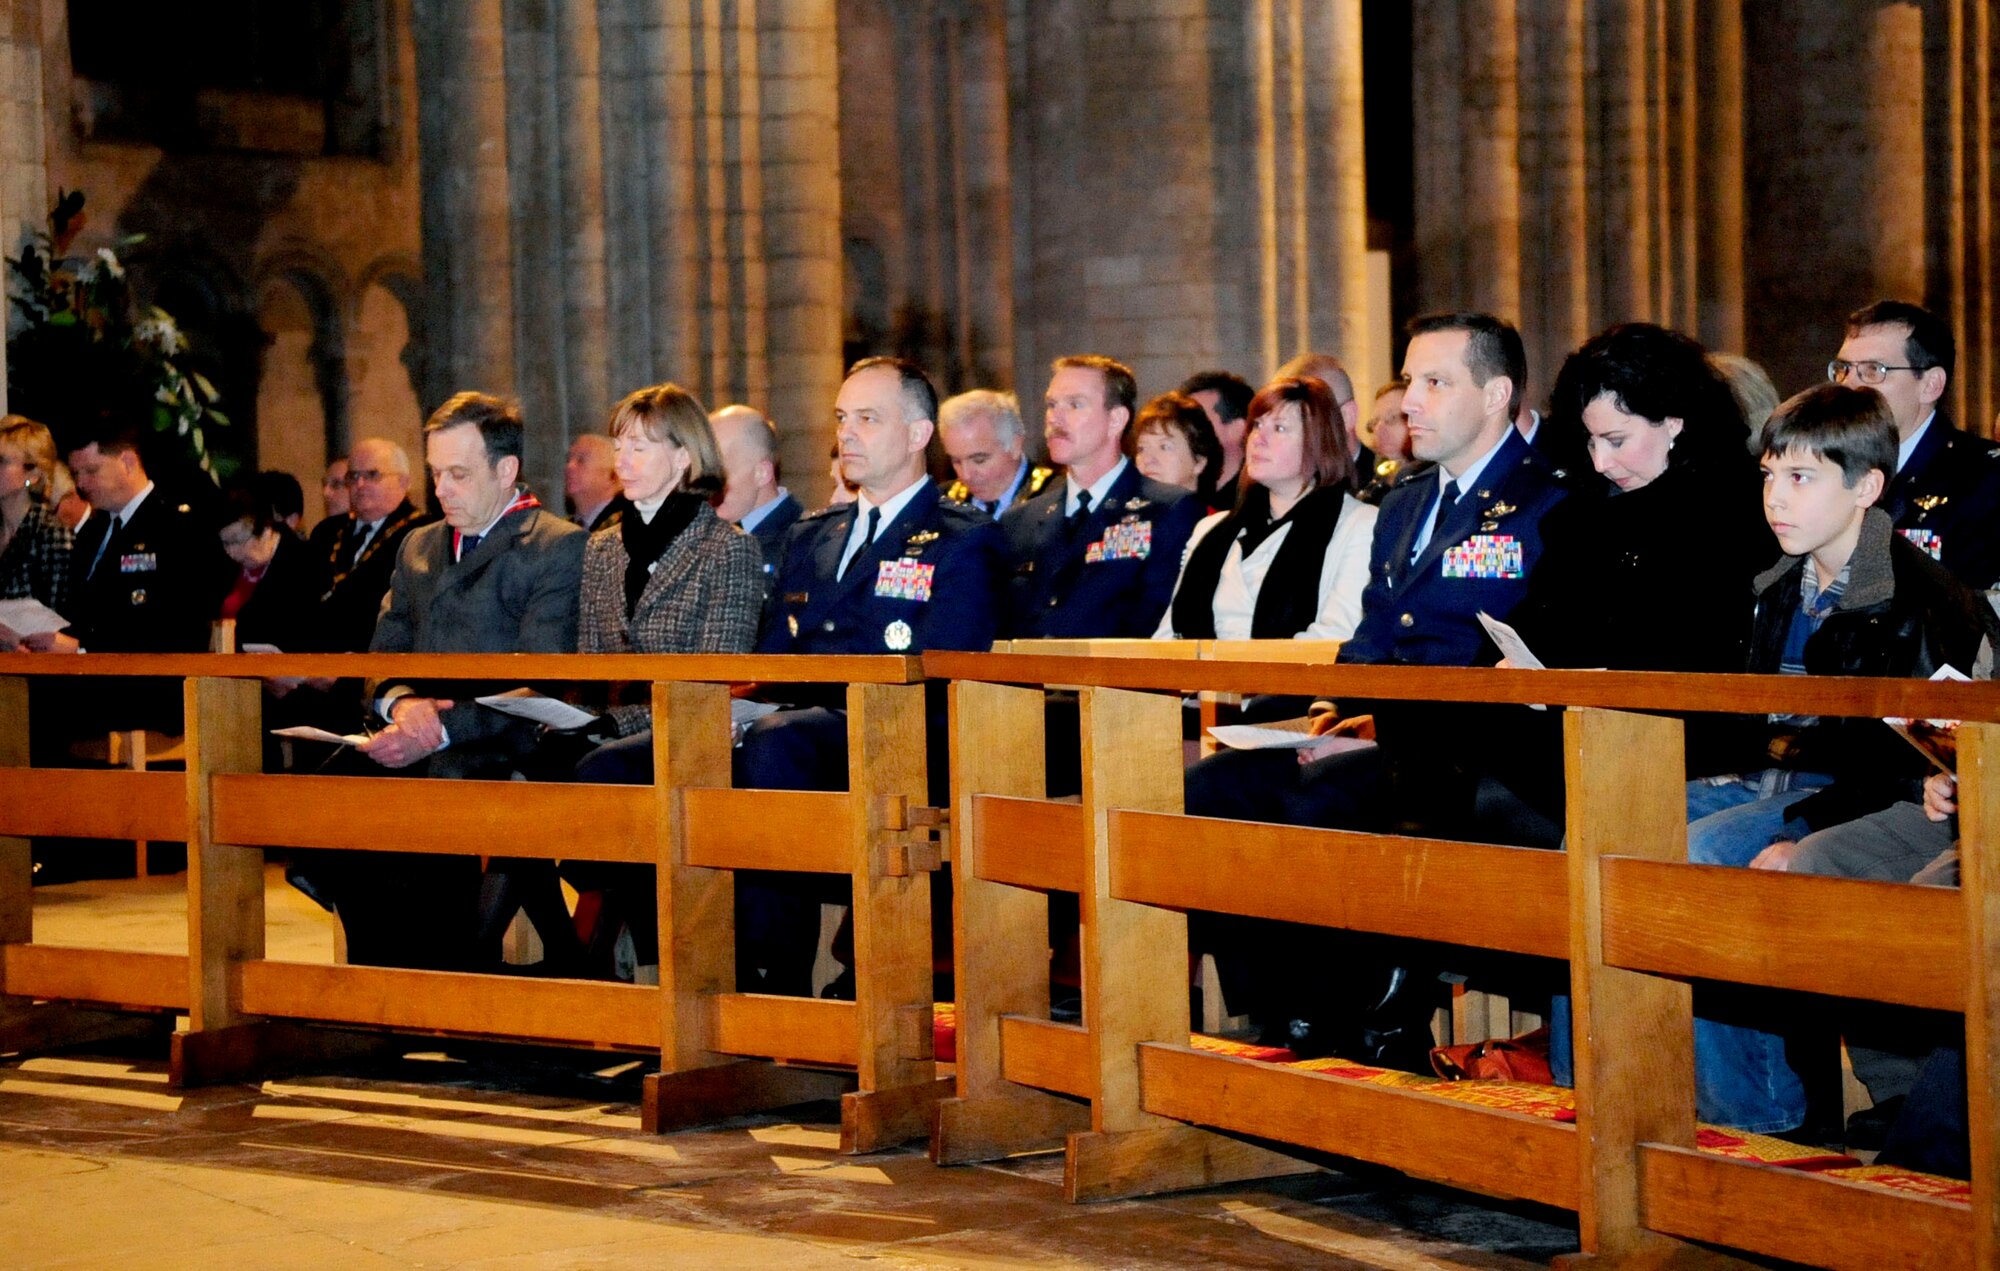 RAF MILDENHALL, England -- American service members, their families and other employees of RAFs Mildenhall and Lakenheath attend a service at Ely Cathedral on the eve of Thanksgiving Nov. 23, 2011. The 25th annual Thanksgiving service gave U.S. service members in England an opportunity to enjoy a holiday service at one of the cathedrals in the local area. (U.S. Air Force photo/Senior Airman Ethan Morgan)